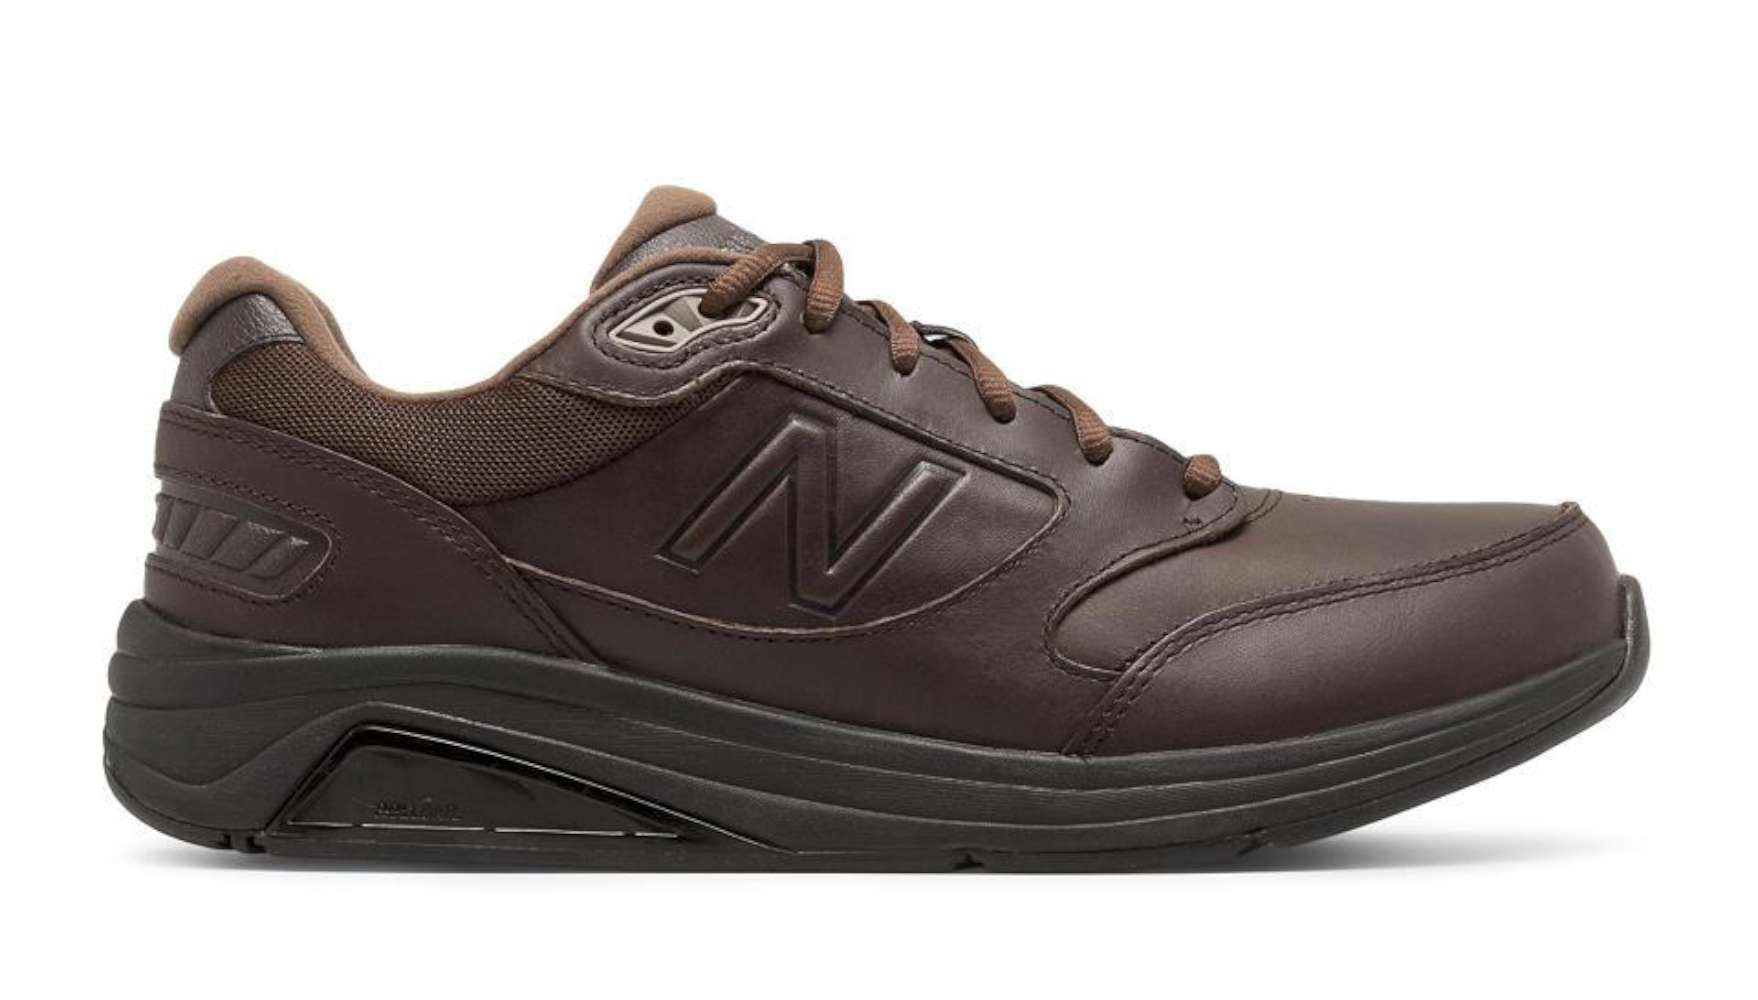 New Balance Mens 928v3 Low Top Lace Up Walking Shoes | Walmart Canada